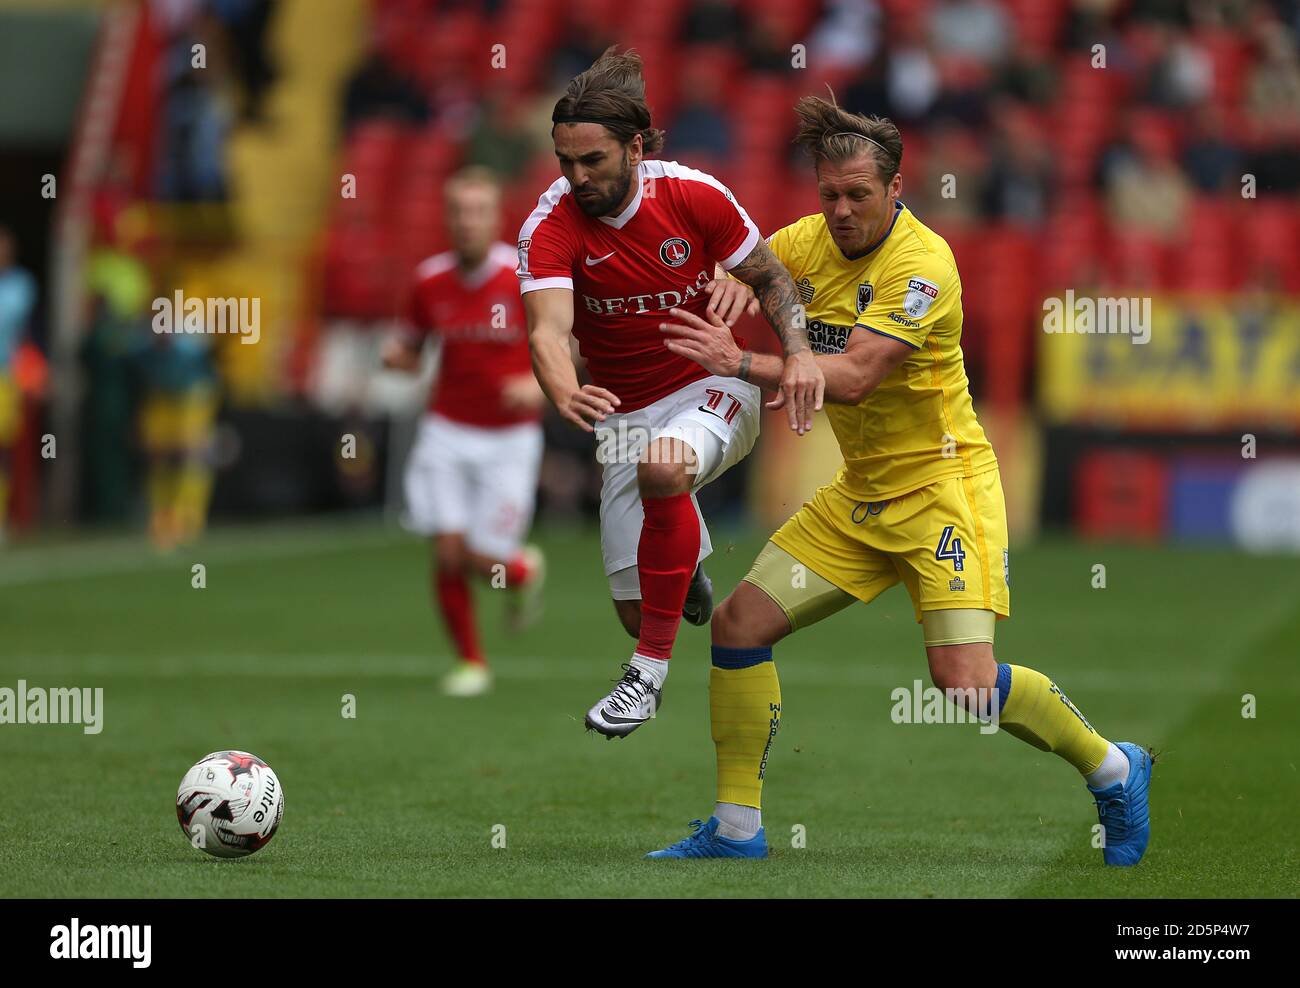 Charlton Athletic's Ricky Holmes (left) and AFC wimbledon's Dannie Bulman battle for the ball Stock Photo